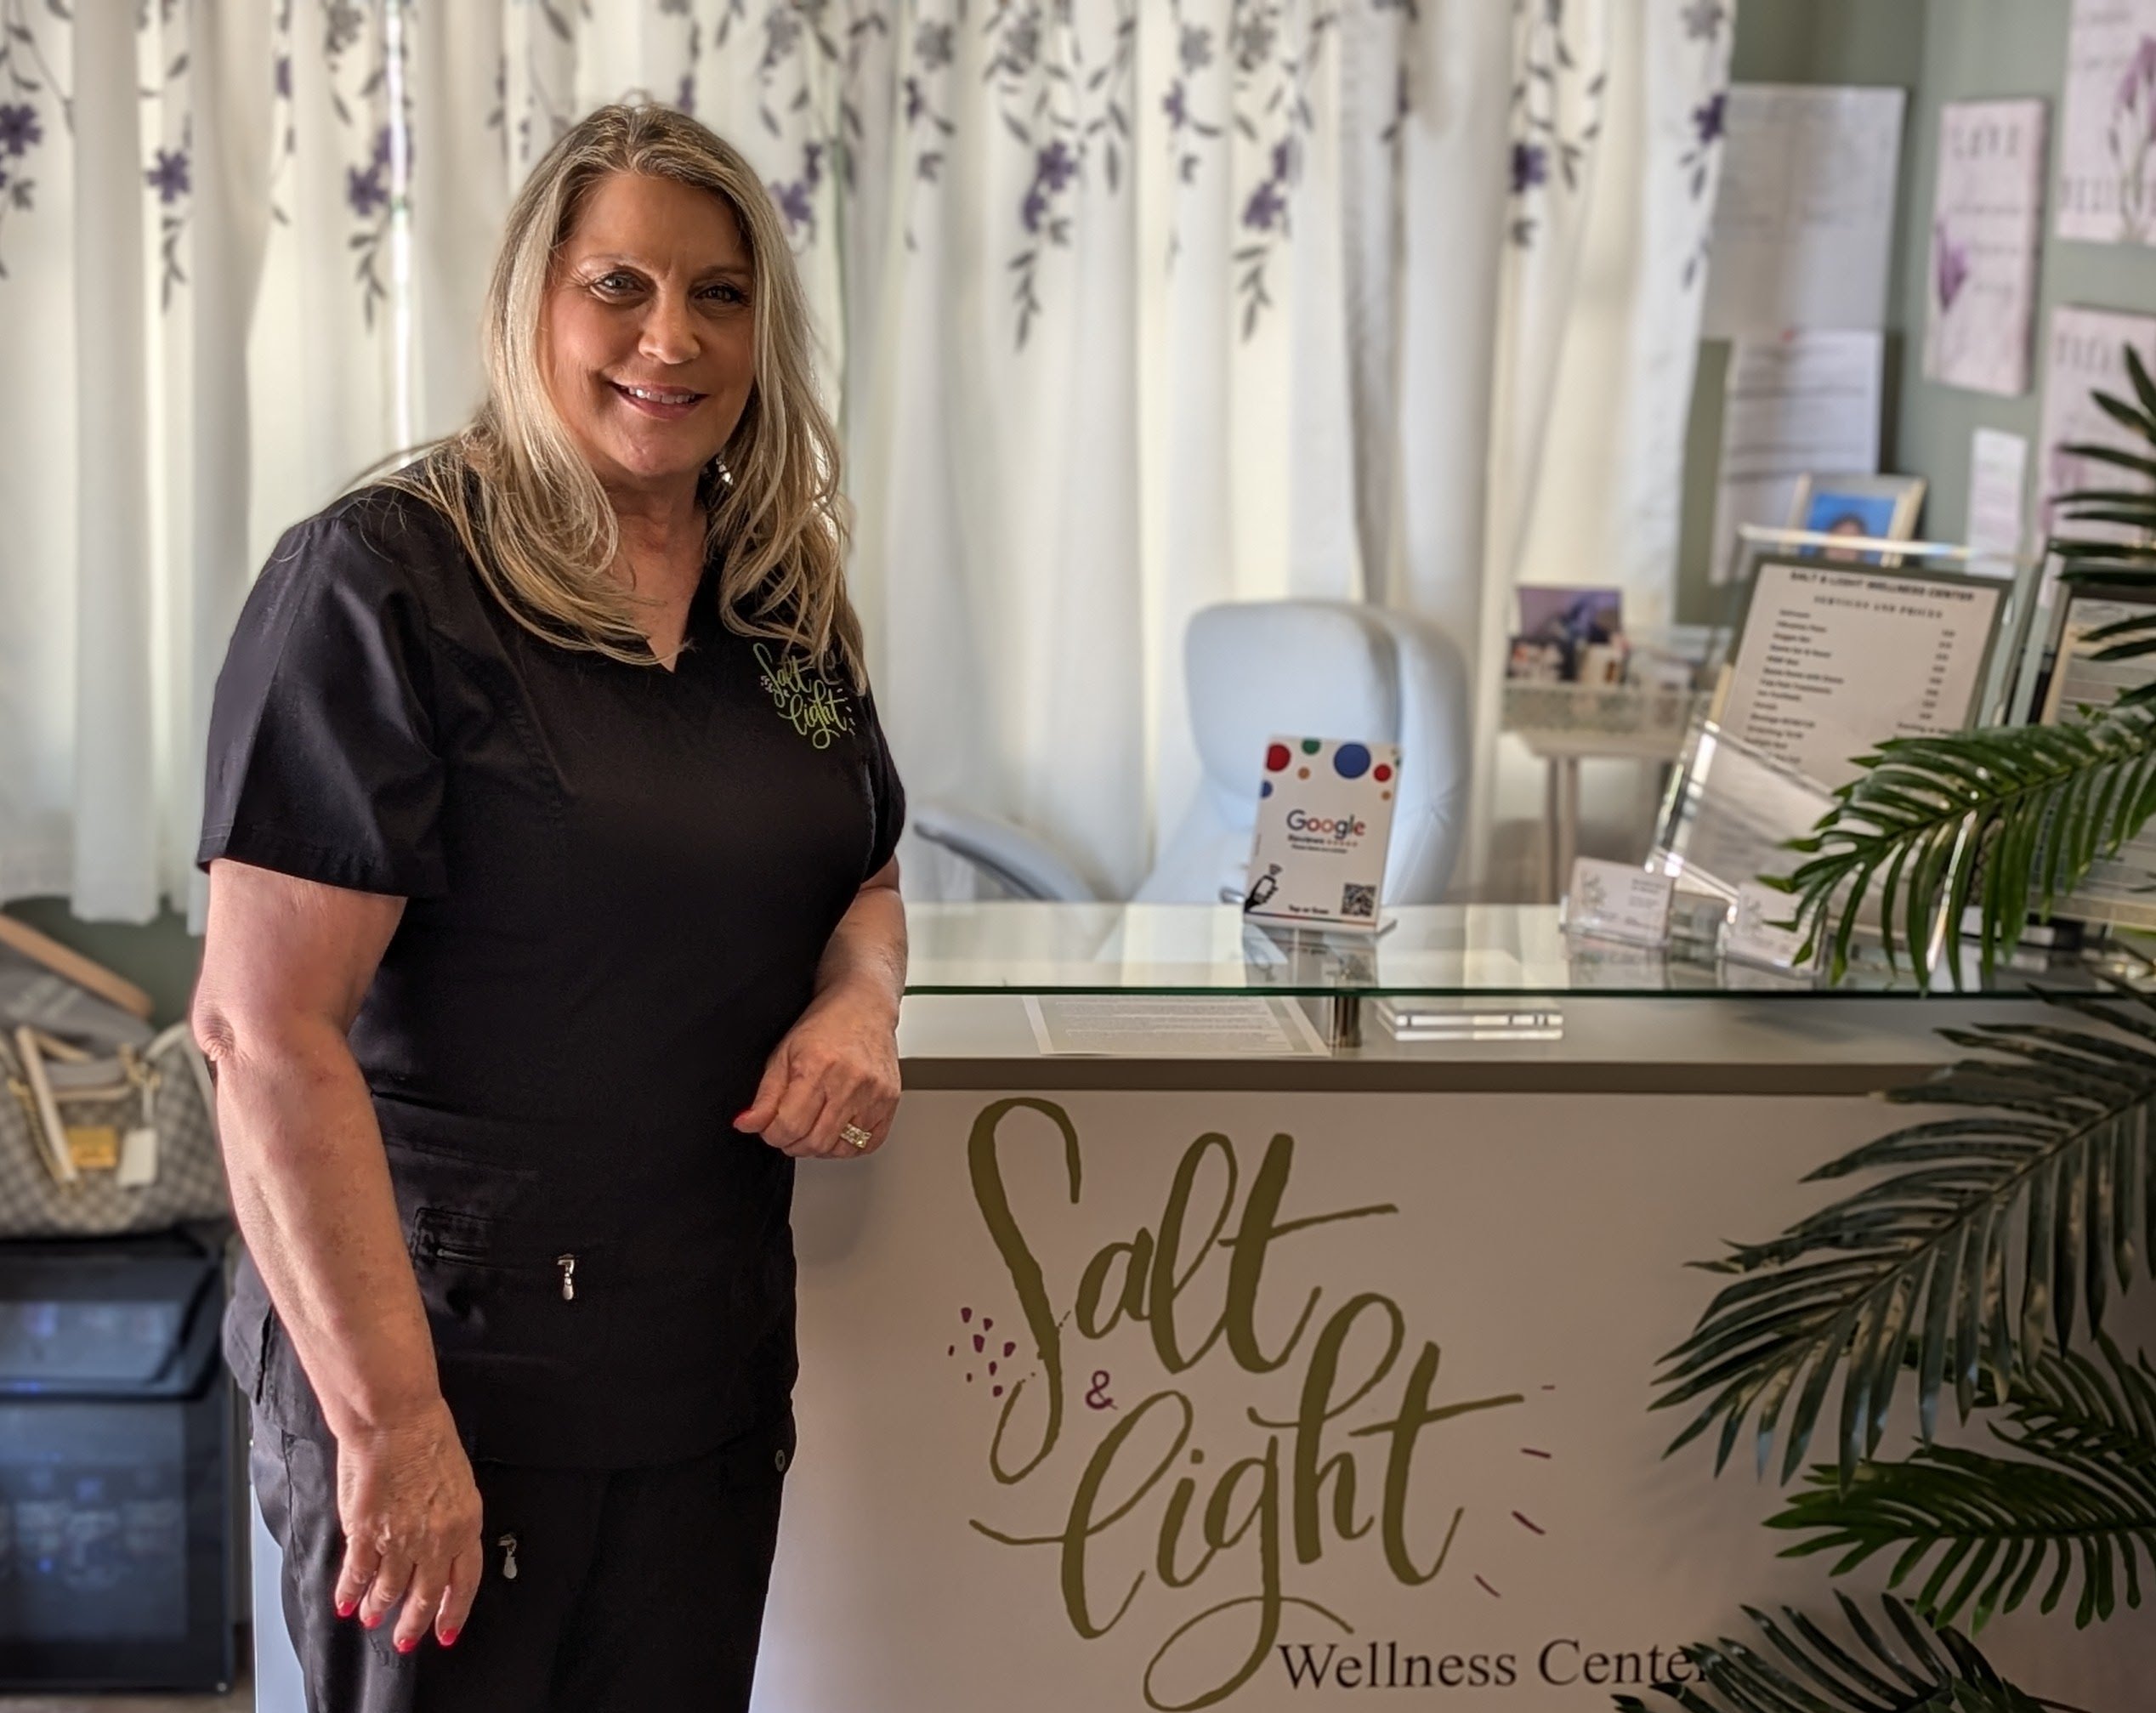 Innovative Therapies and Community Care at Salt and Light Wellness Center